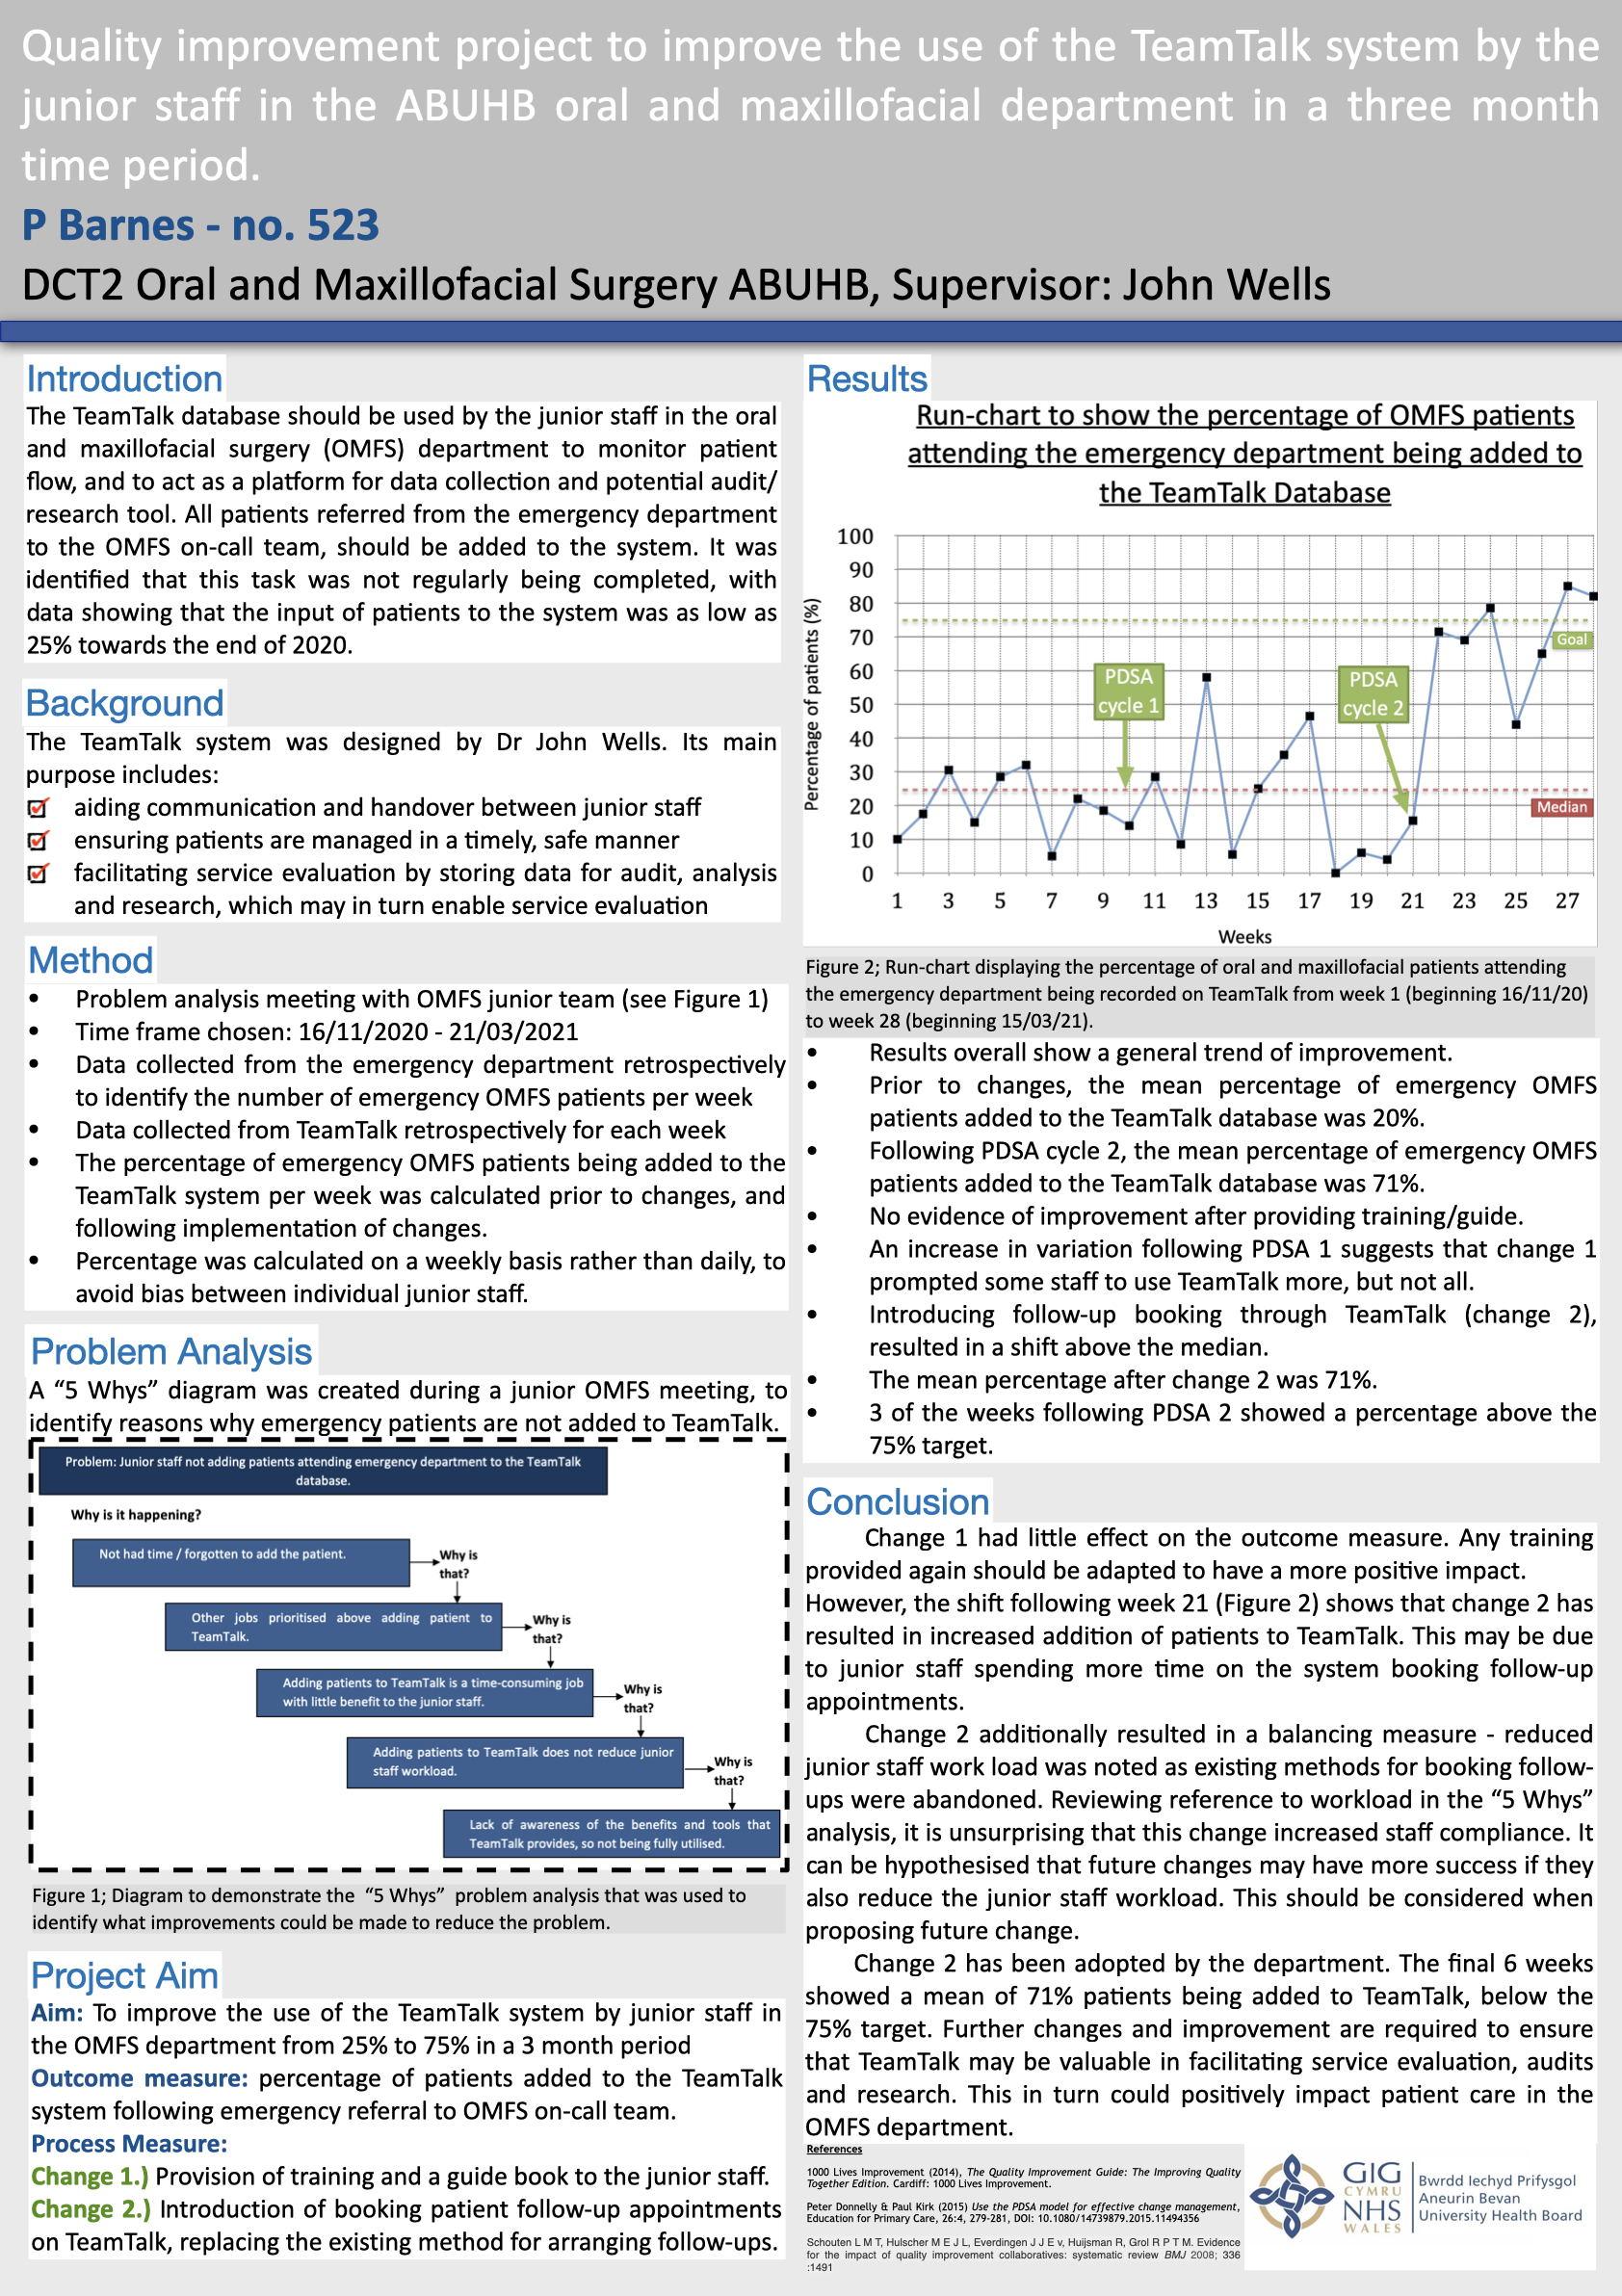 Poster Quality improvement project to improve the use of the Team Talk Database system by the OMFS SHOs over 4 months.